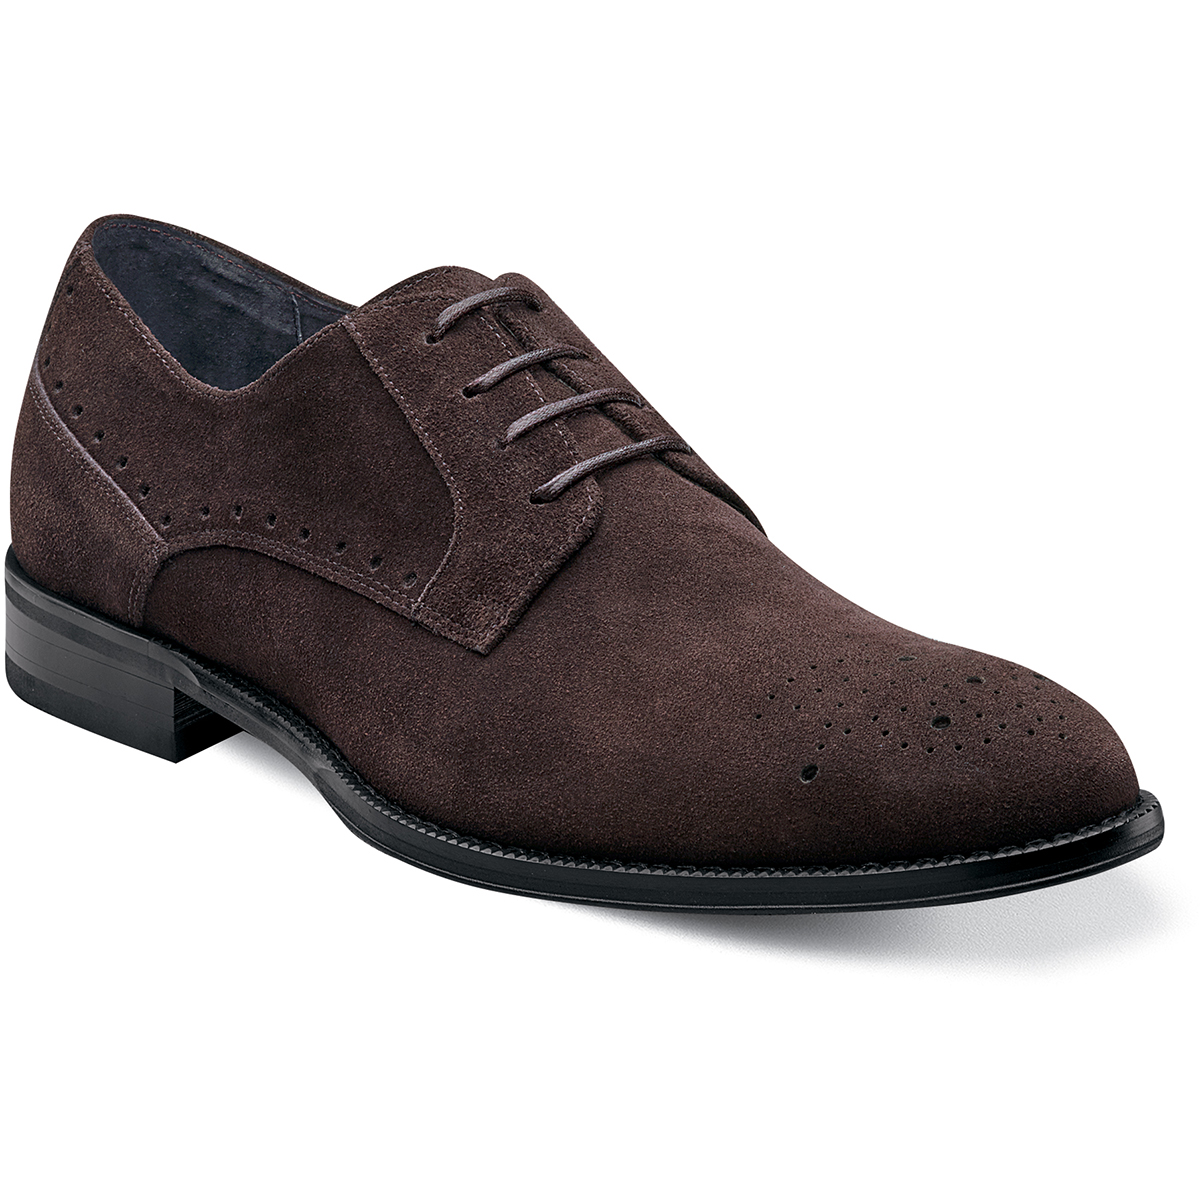 Men's Dress Shoes | Brown Suede Medallion Toe Oxford | Stacy Adams ...